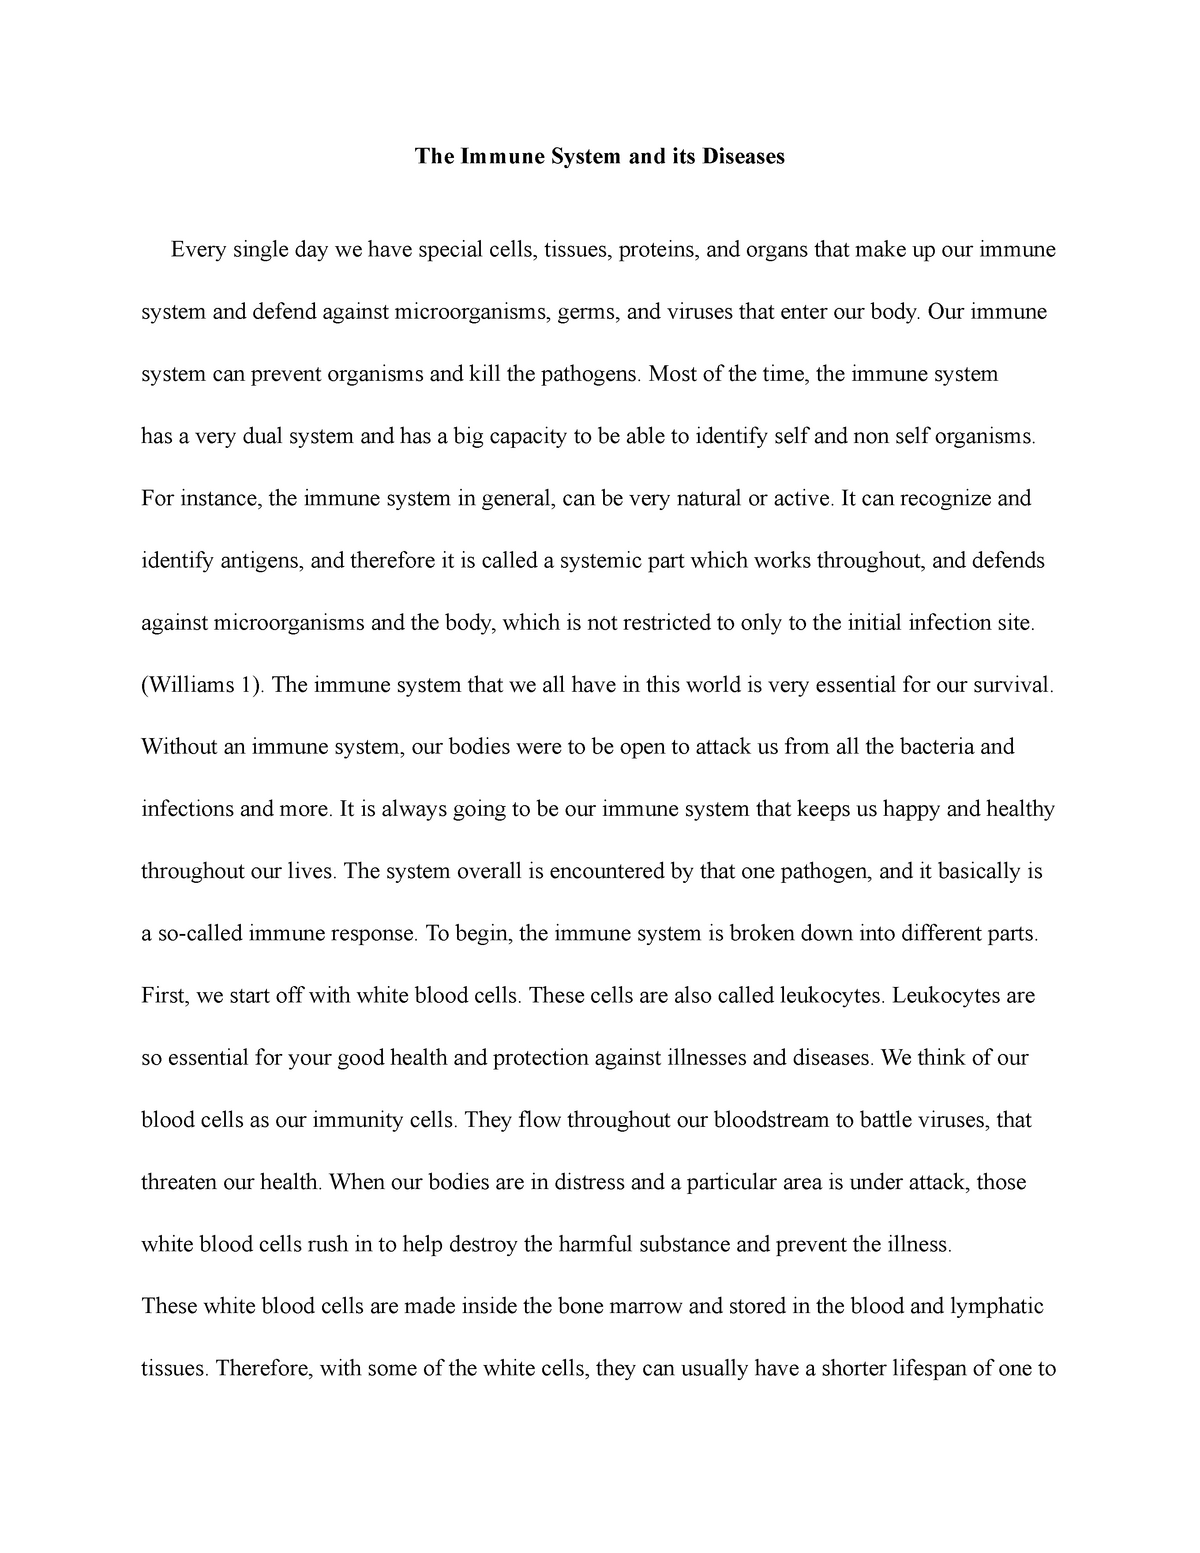 research paper on immune system